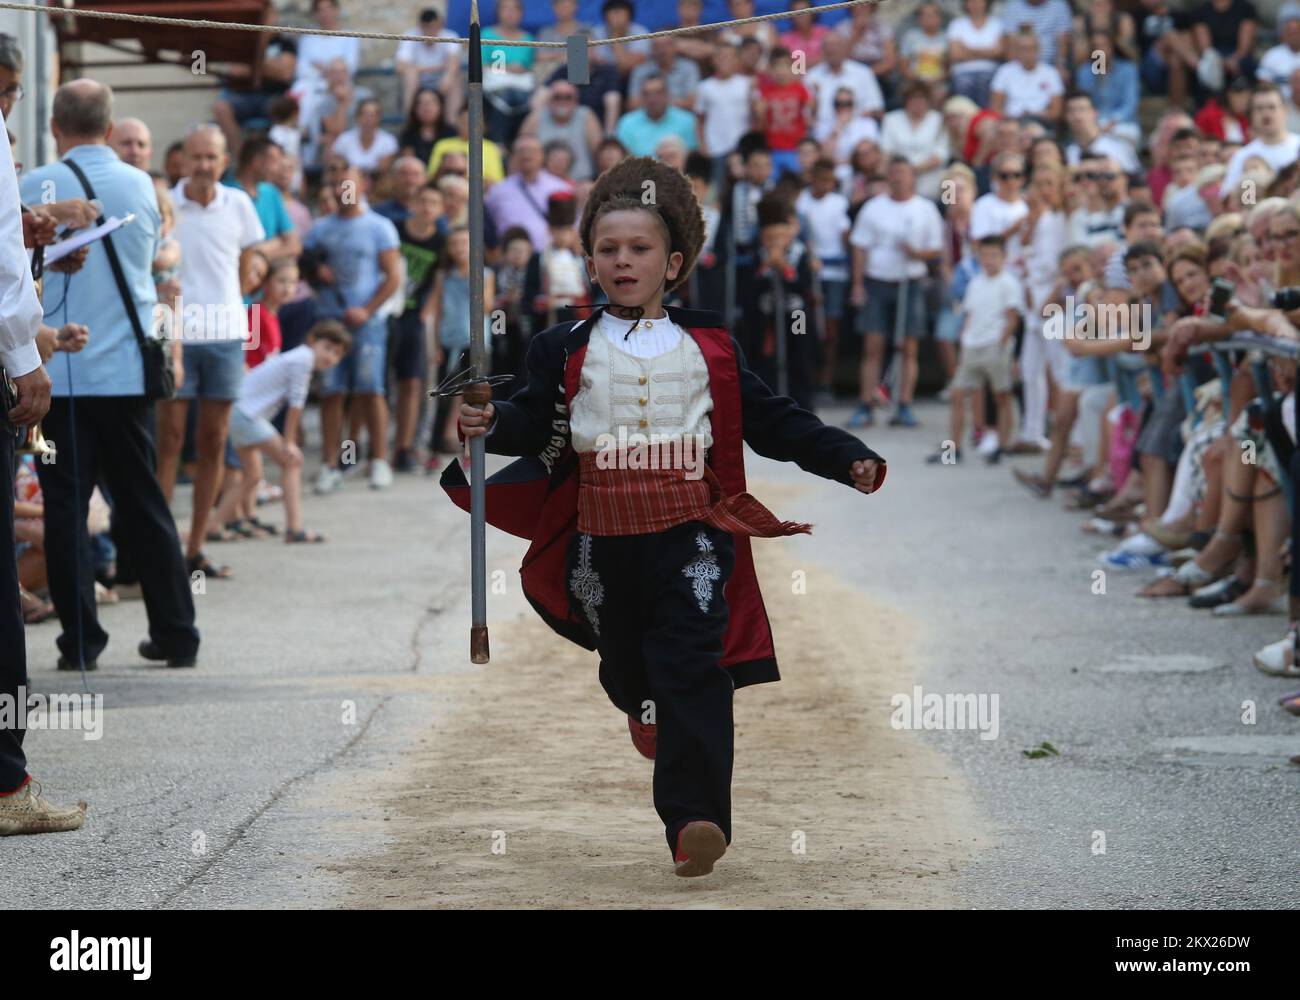 20.08.2017., Brnaze, Croatia - Alkar Vito Vuckovic runs during the Children's Alka tournament in Vuckovici village, Croatia, August 20, 2017. Children's Alka is a tournament which has been held every August in the Croatian village of Vuckovici since 1955. in memory of their ancestors Father Pavao, Boze, Tadija and Zec, whose heroism and bravery made them become prominent in the decisive battle against the Ottomans in 1715. Only boys up to 10 years can participate. Photo: Ivo Cagalj/PIXSELL Stock Photo